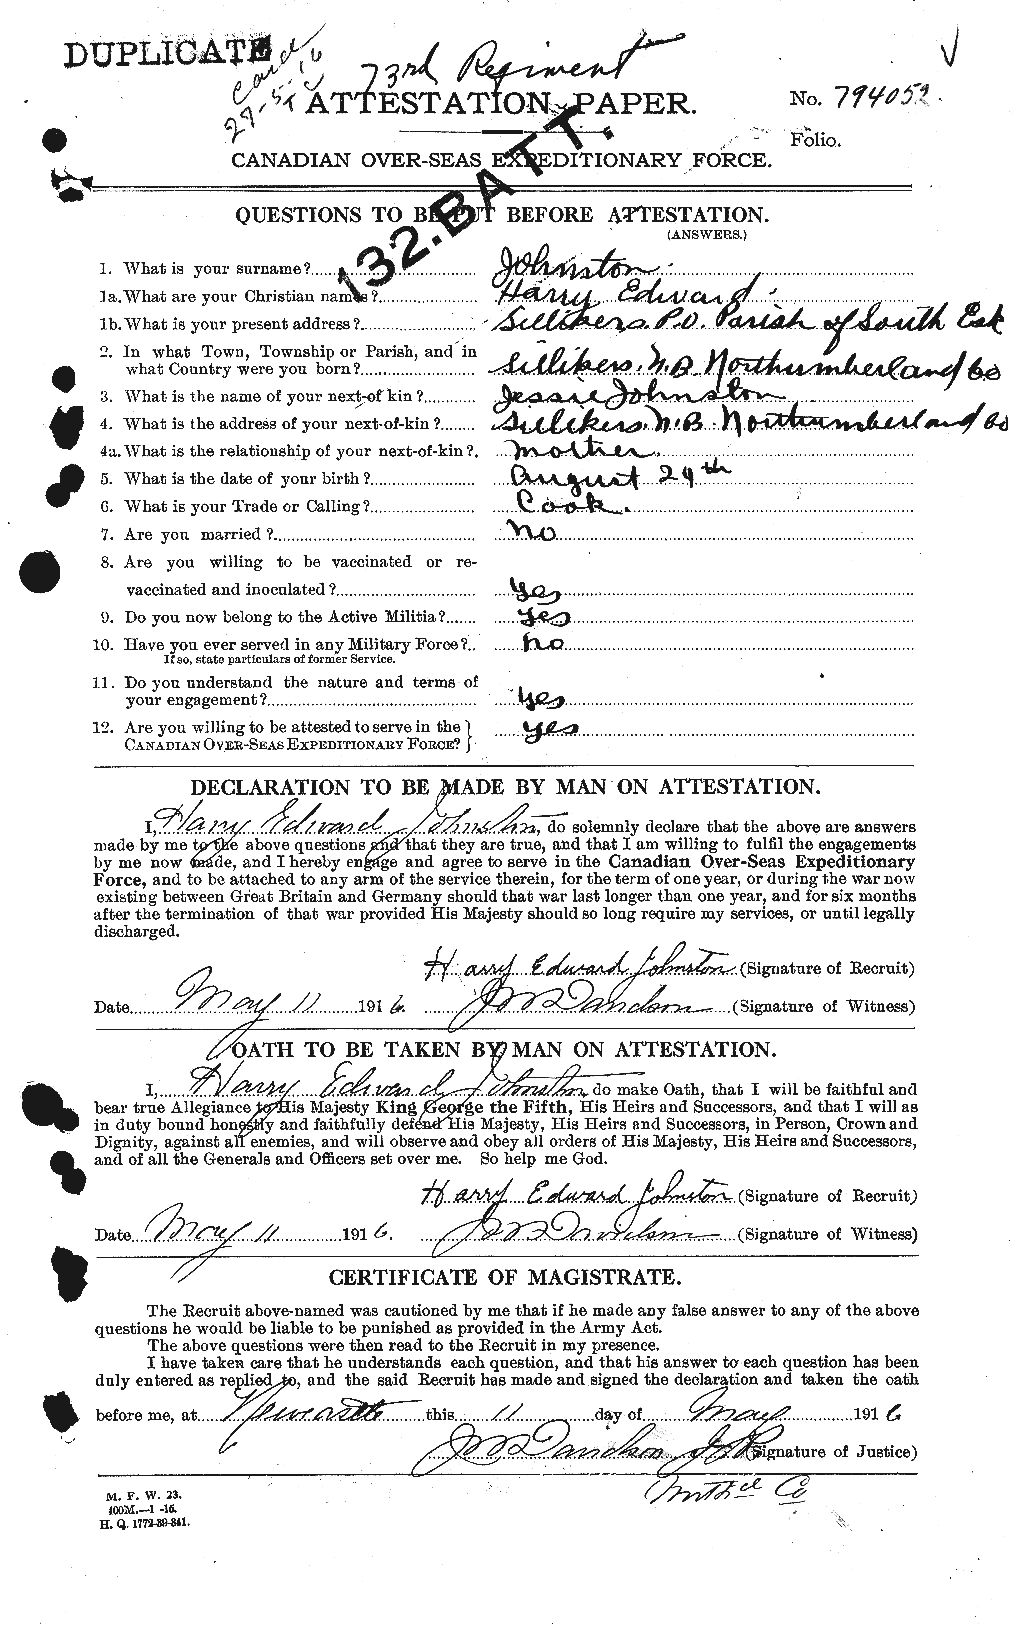 Personnel Records of the First World War - CEF 419514a